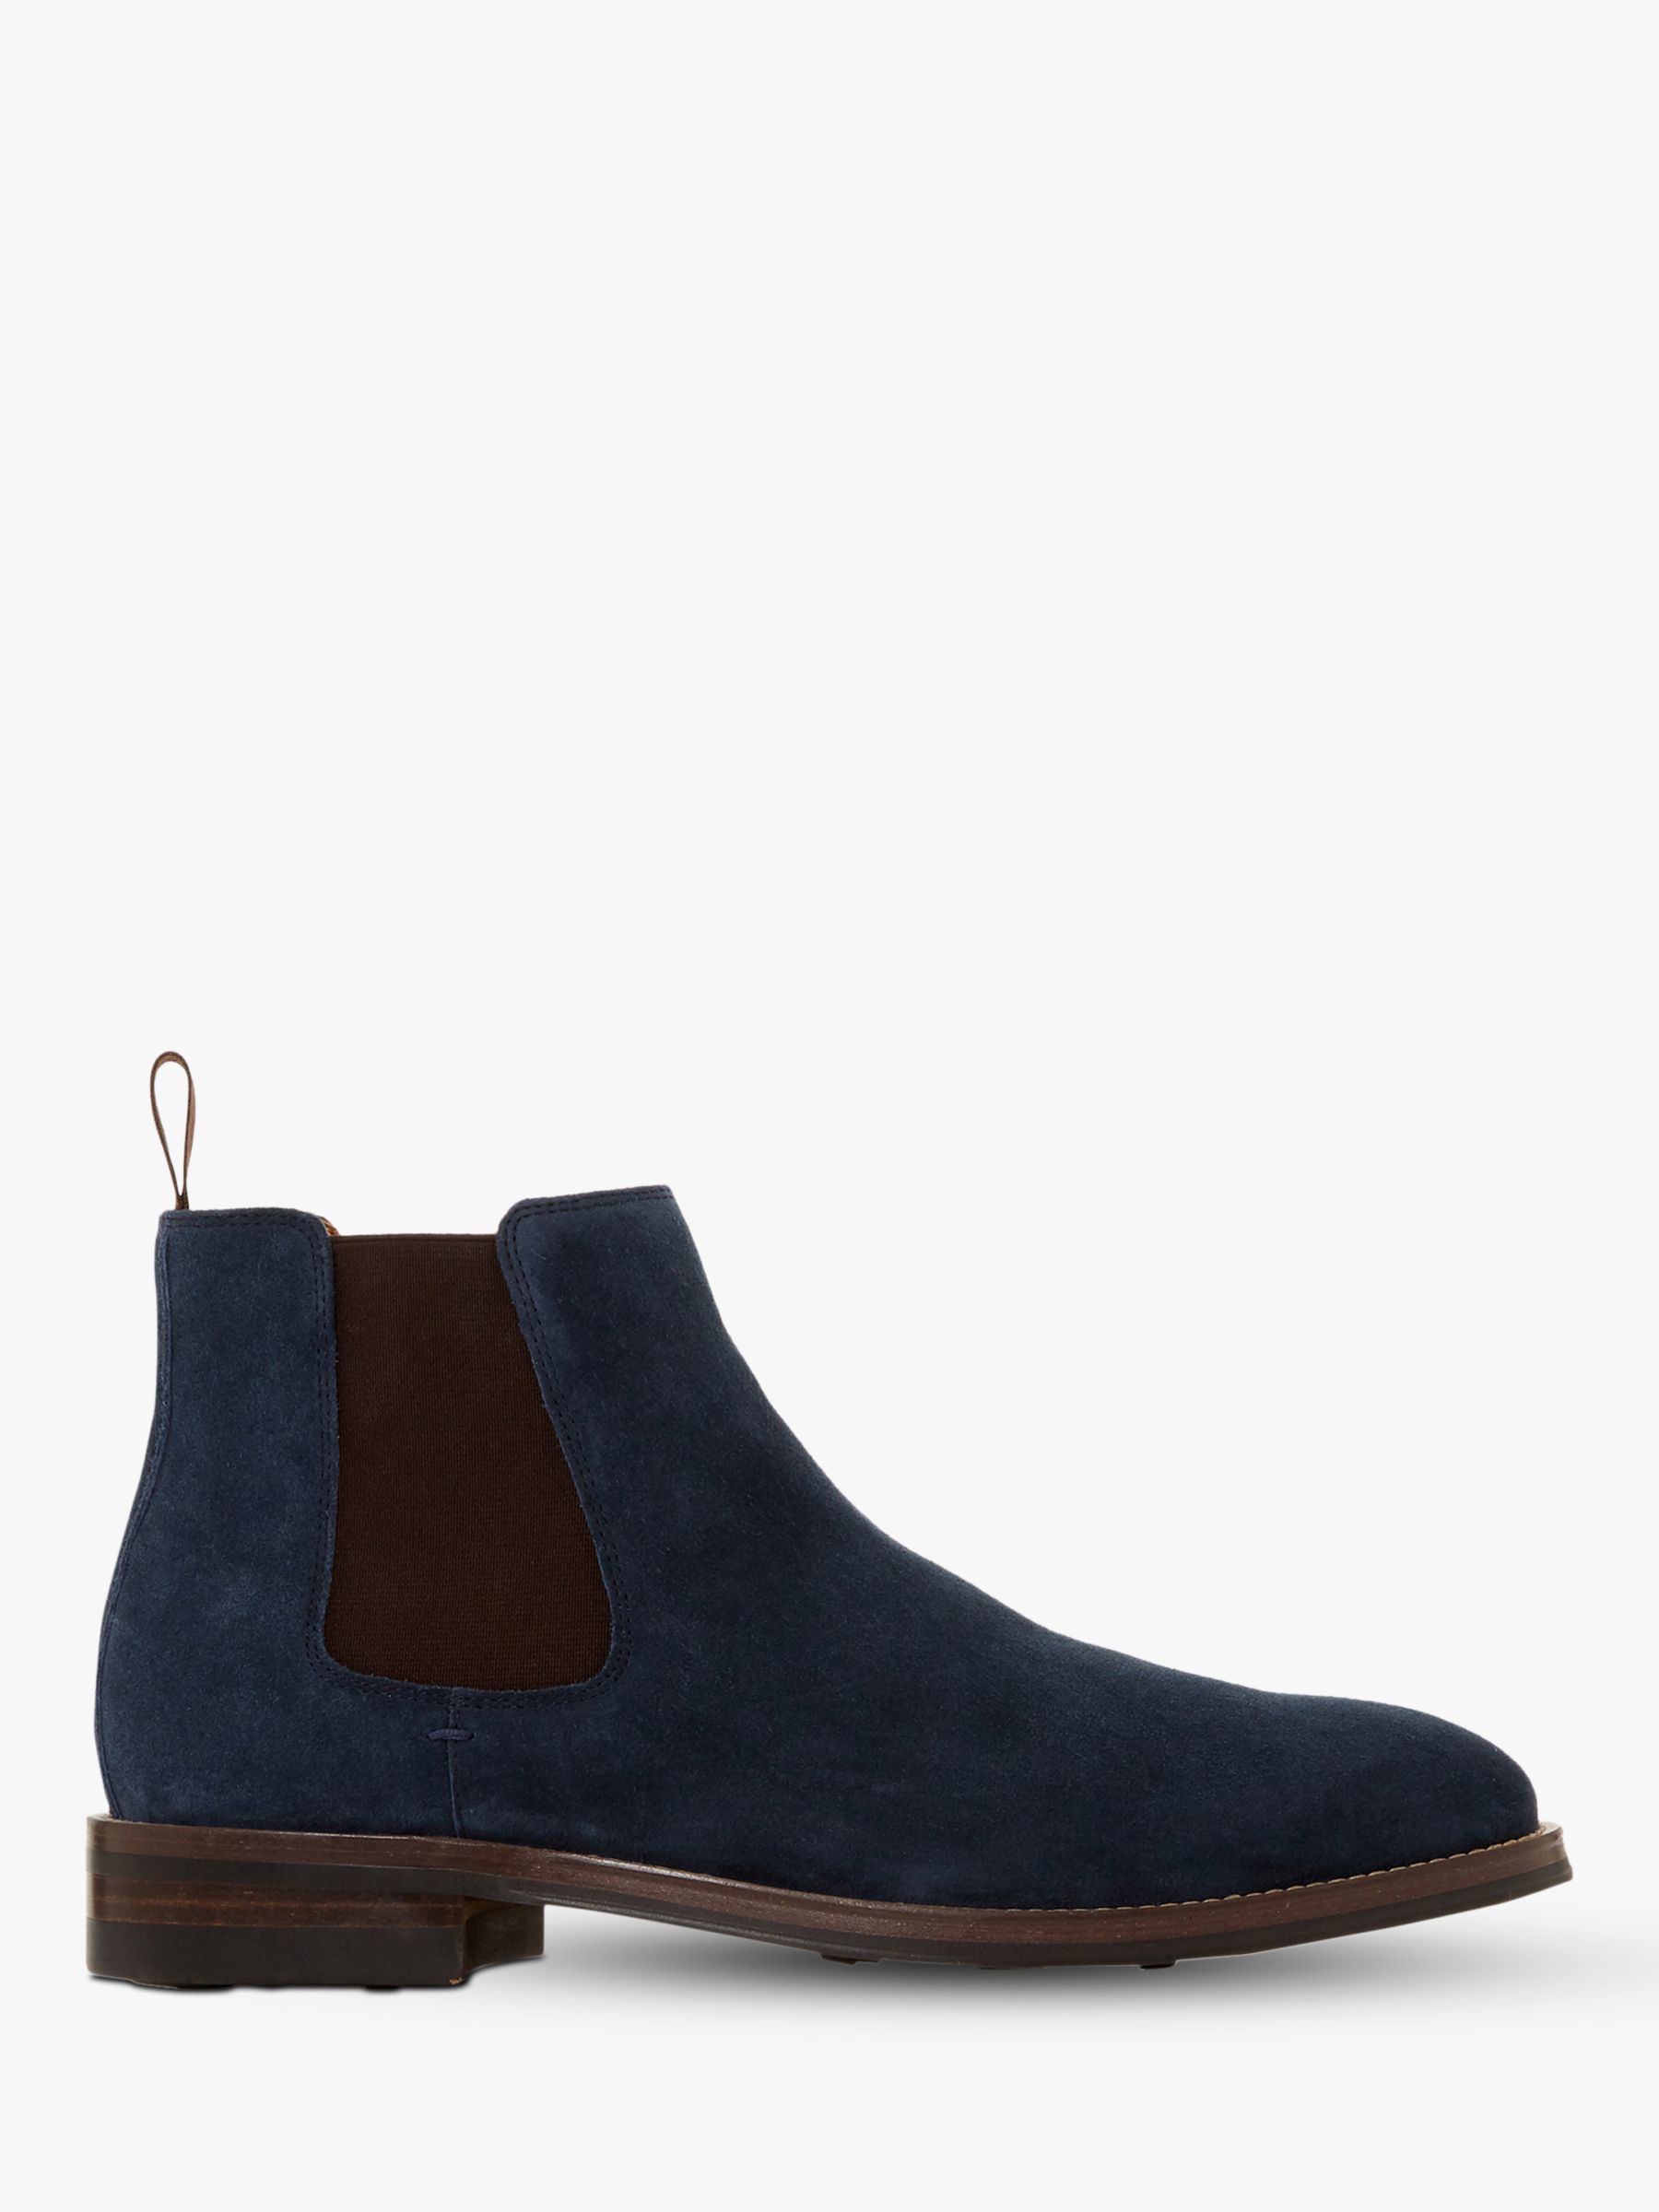 Dune Charltons Suede Chelsea Boots, Navy